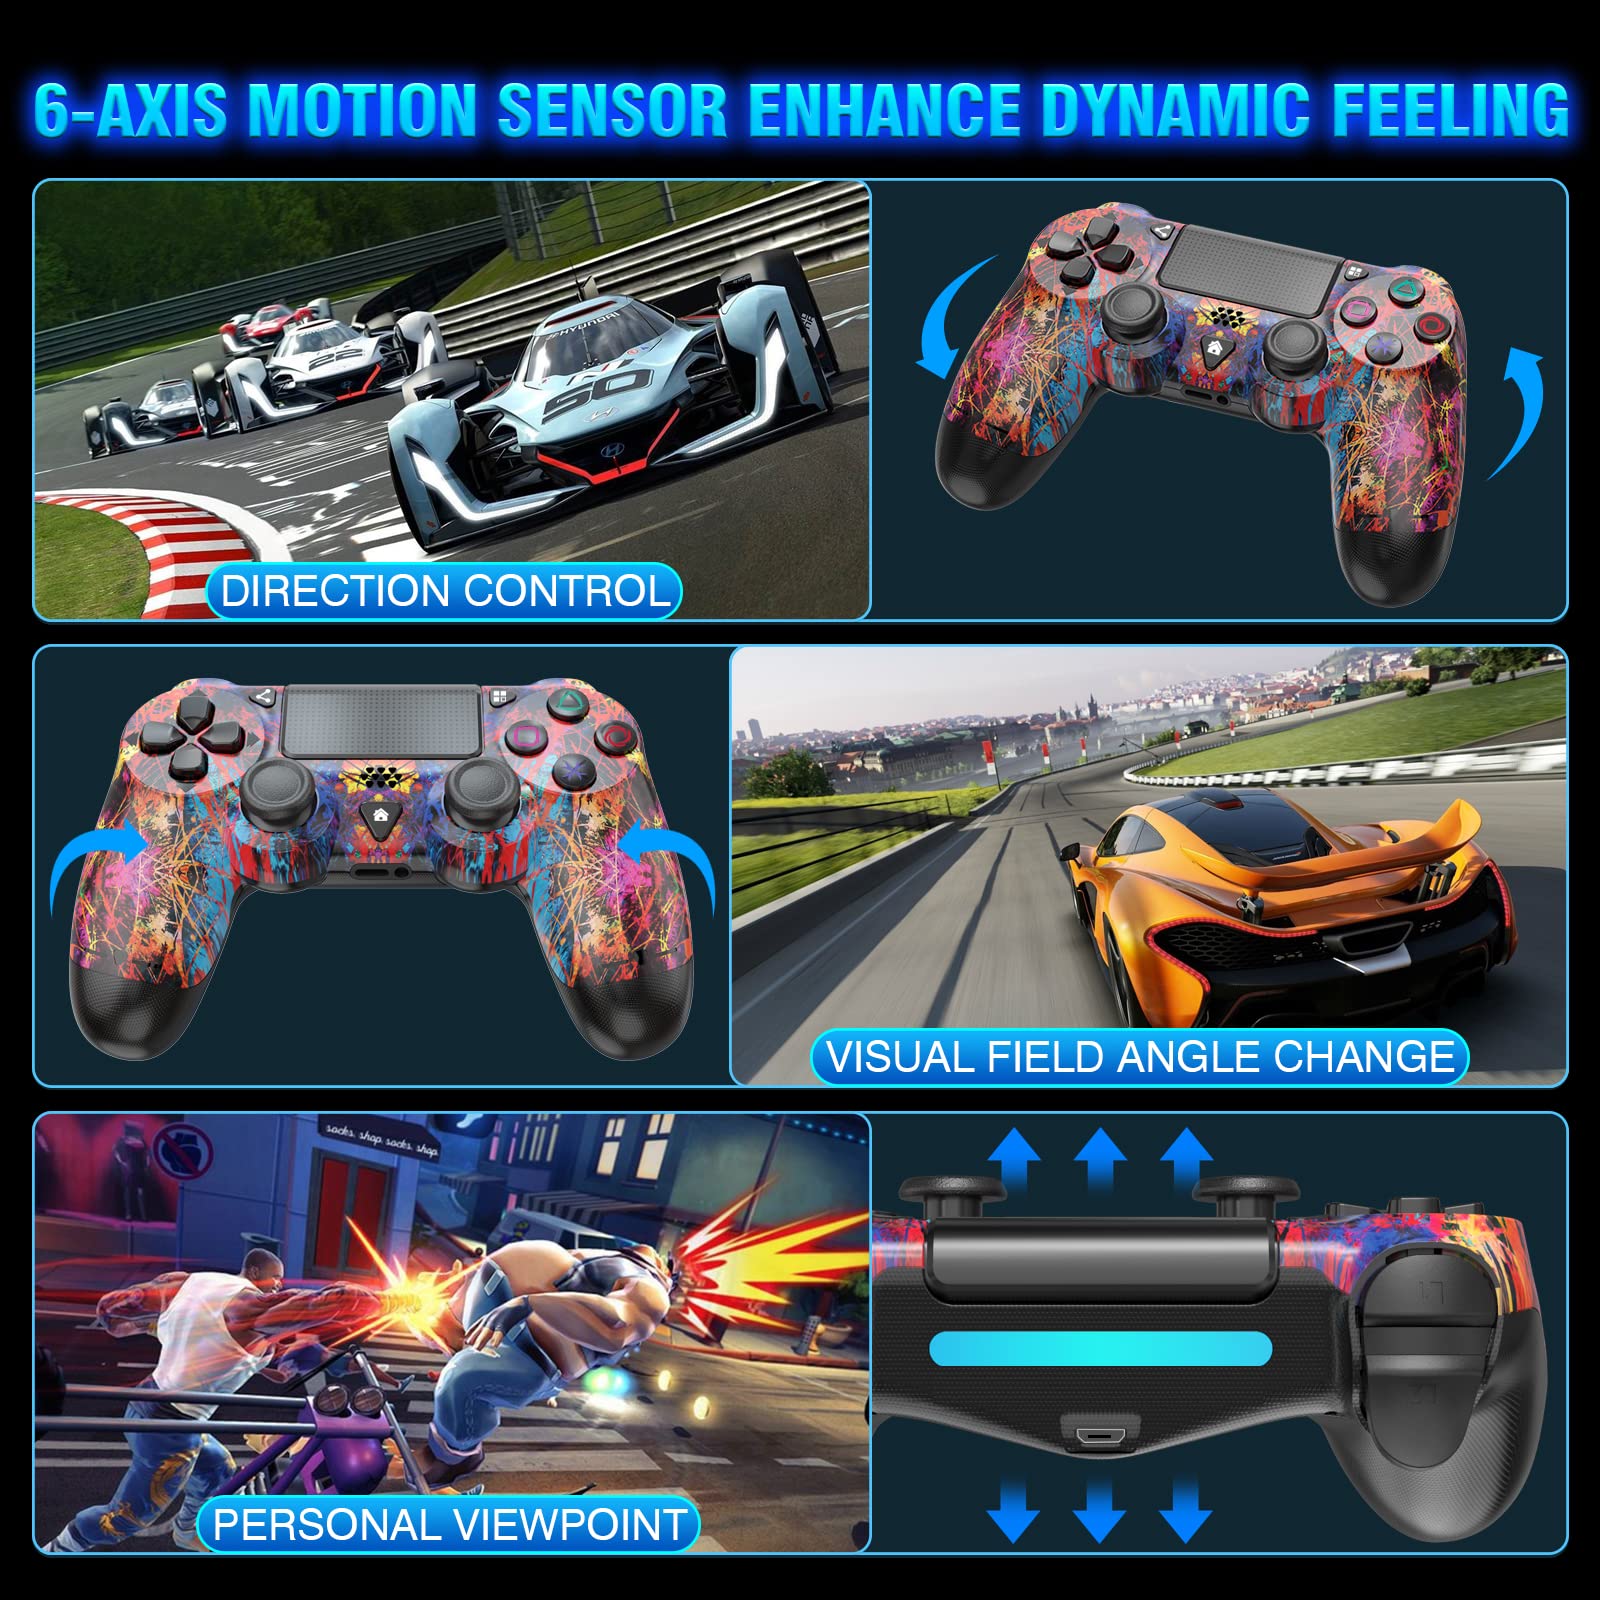 Akvwj 【Upgraded】 Wireless PS4 Remote Controller Compatible with Playstation 4/Slim/Pro with Dual Vibration/6-Axis Motion Sensor/Audio Replacement for PS4 Controller